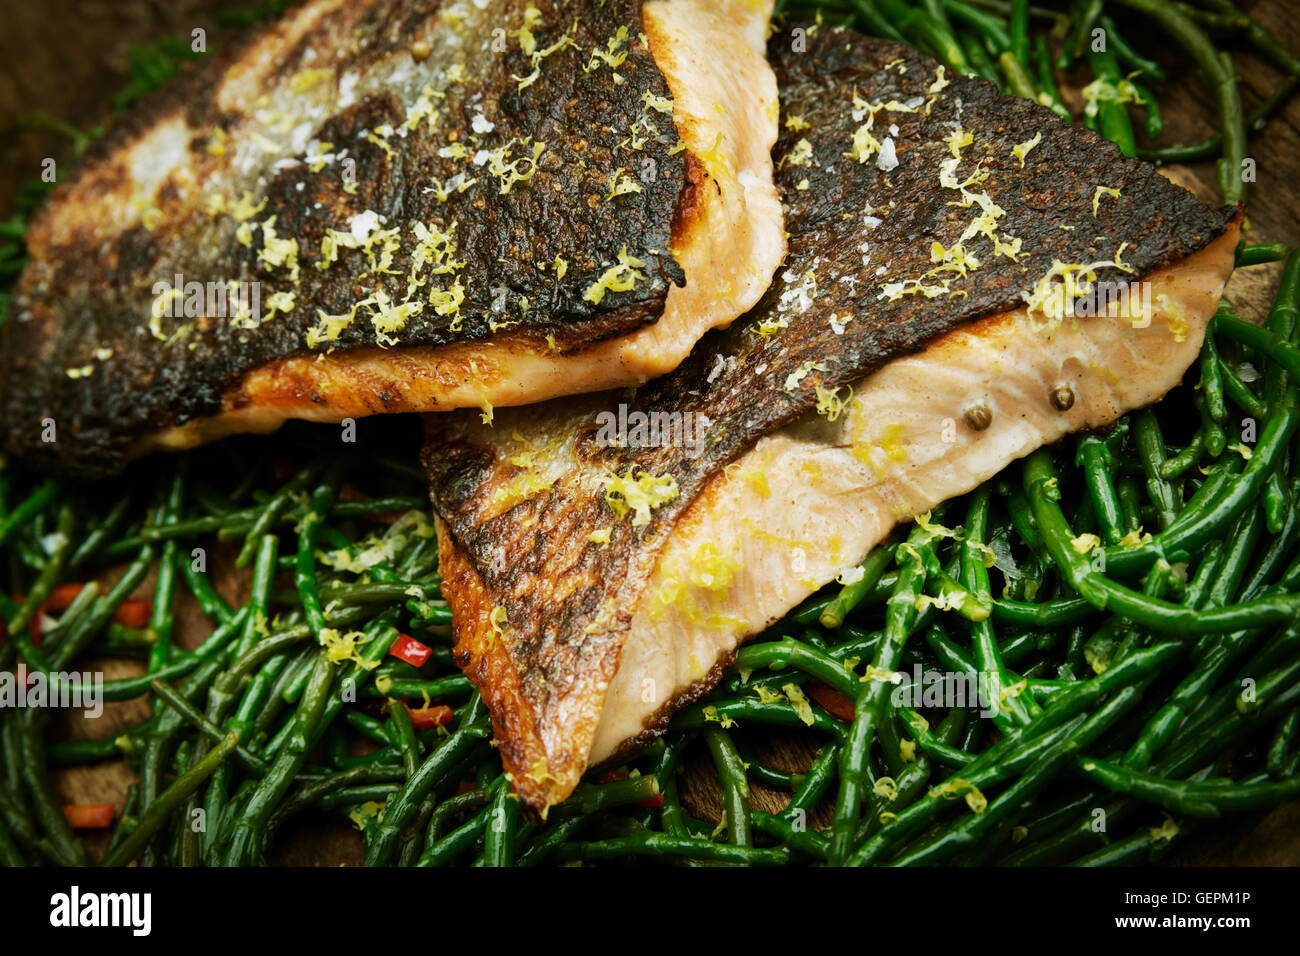 Close up of grilled fish fillets with crispy skin on a bed of samphire. Stock Photo